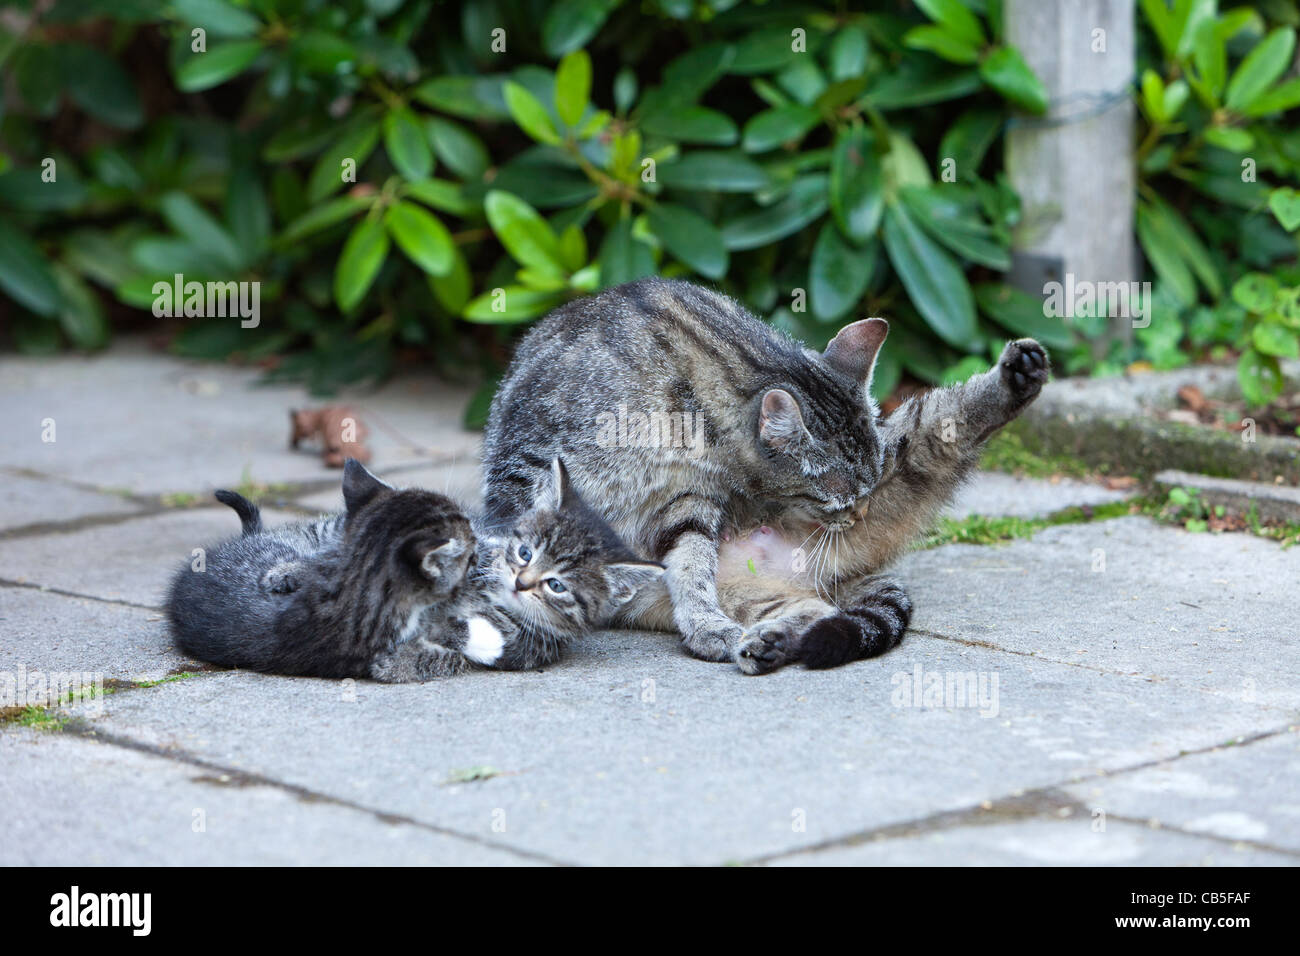 Cat and kittens, outdoors in garden, Lower Saxony, Germany Stock Photo